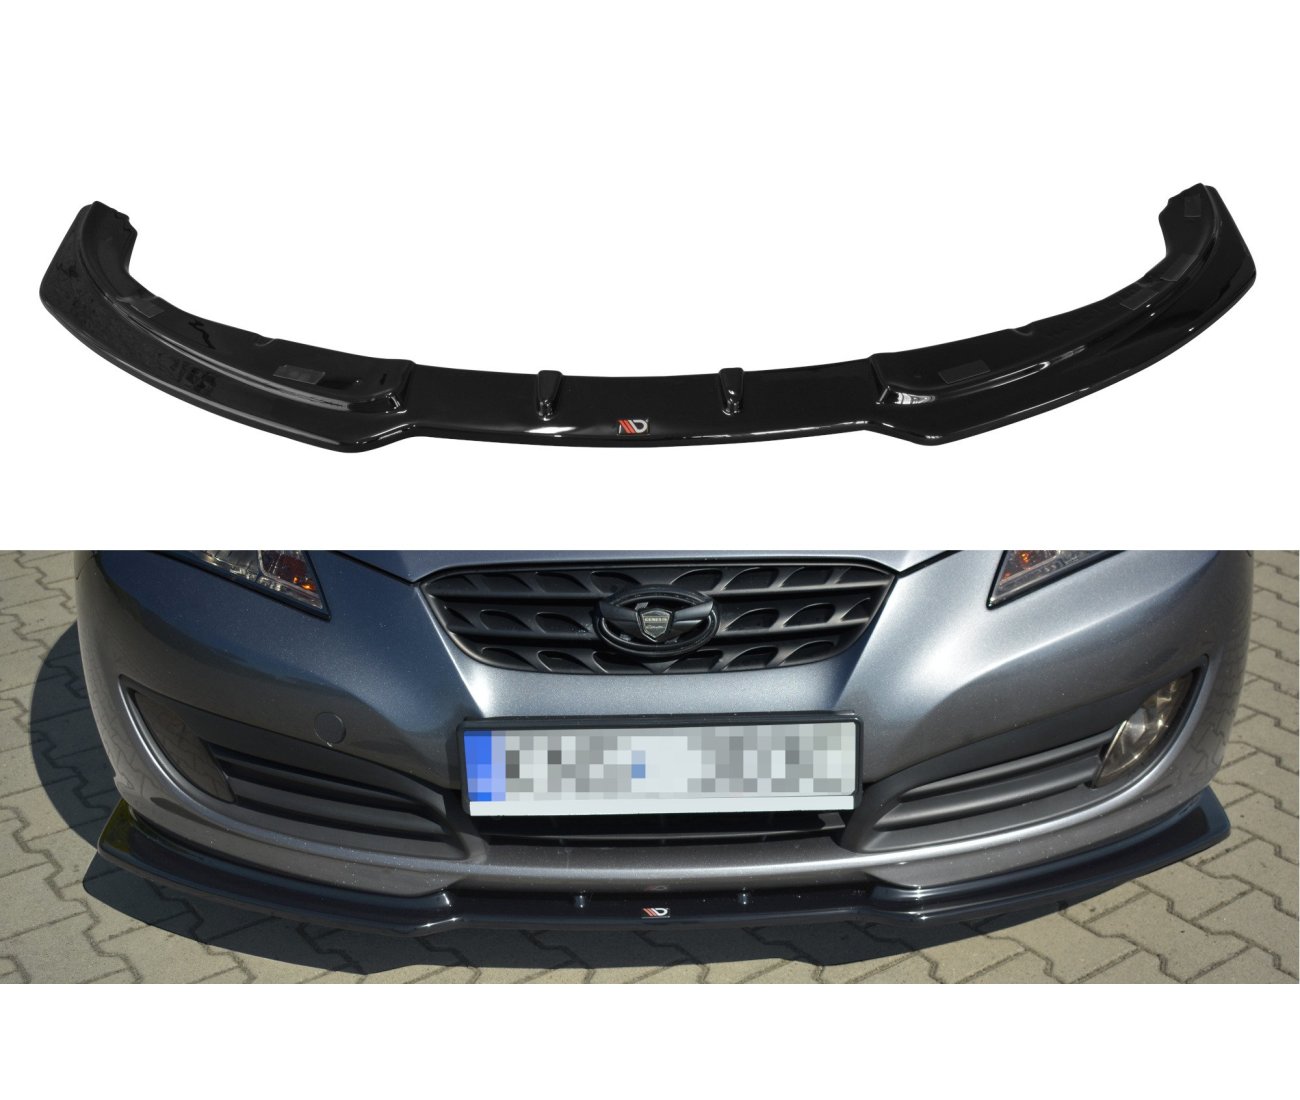 Cup spoiler lip front approach for Hyundai Genesis Coupe